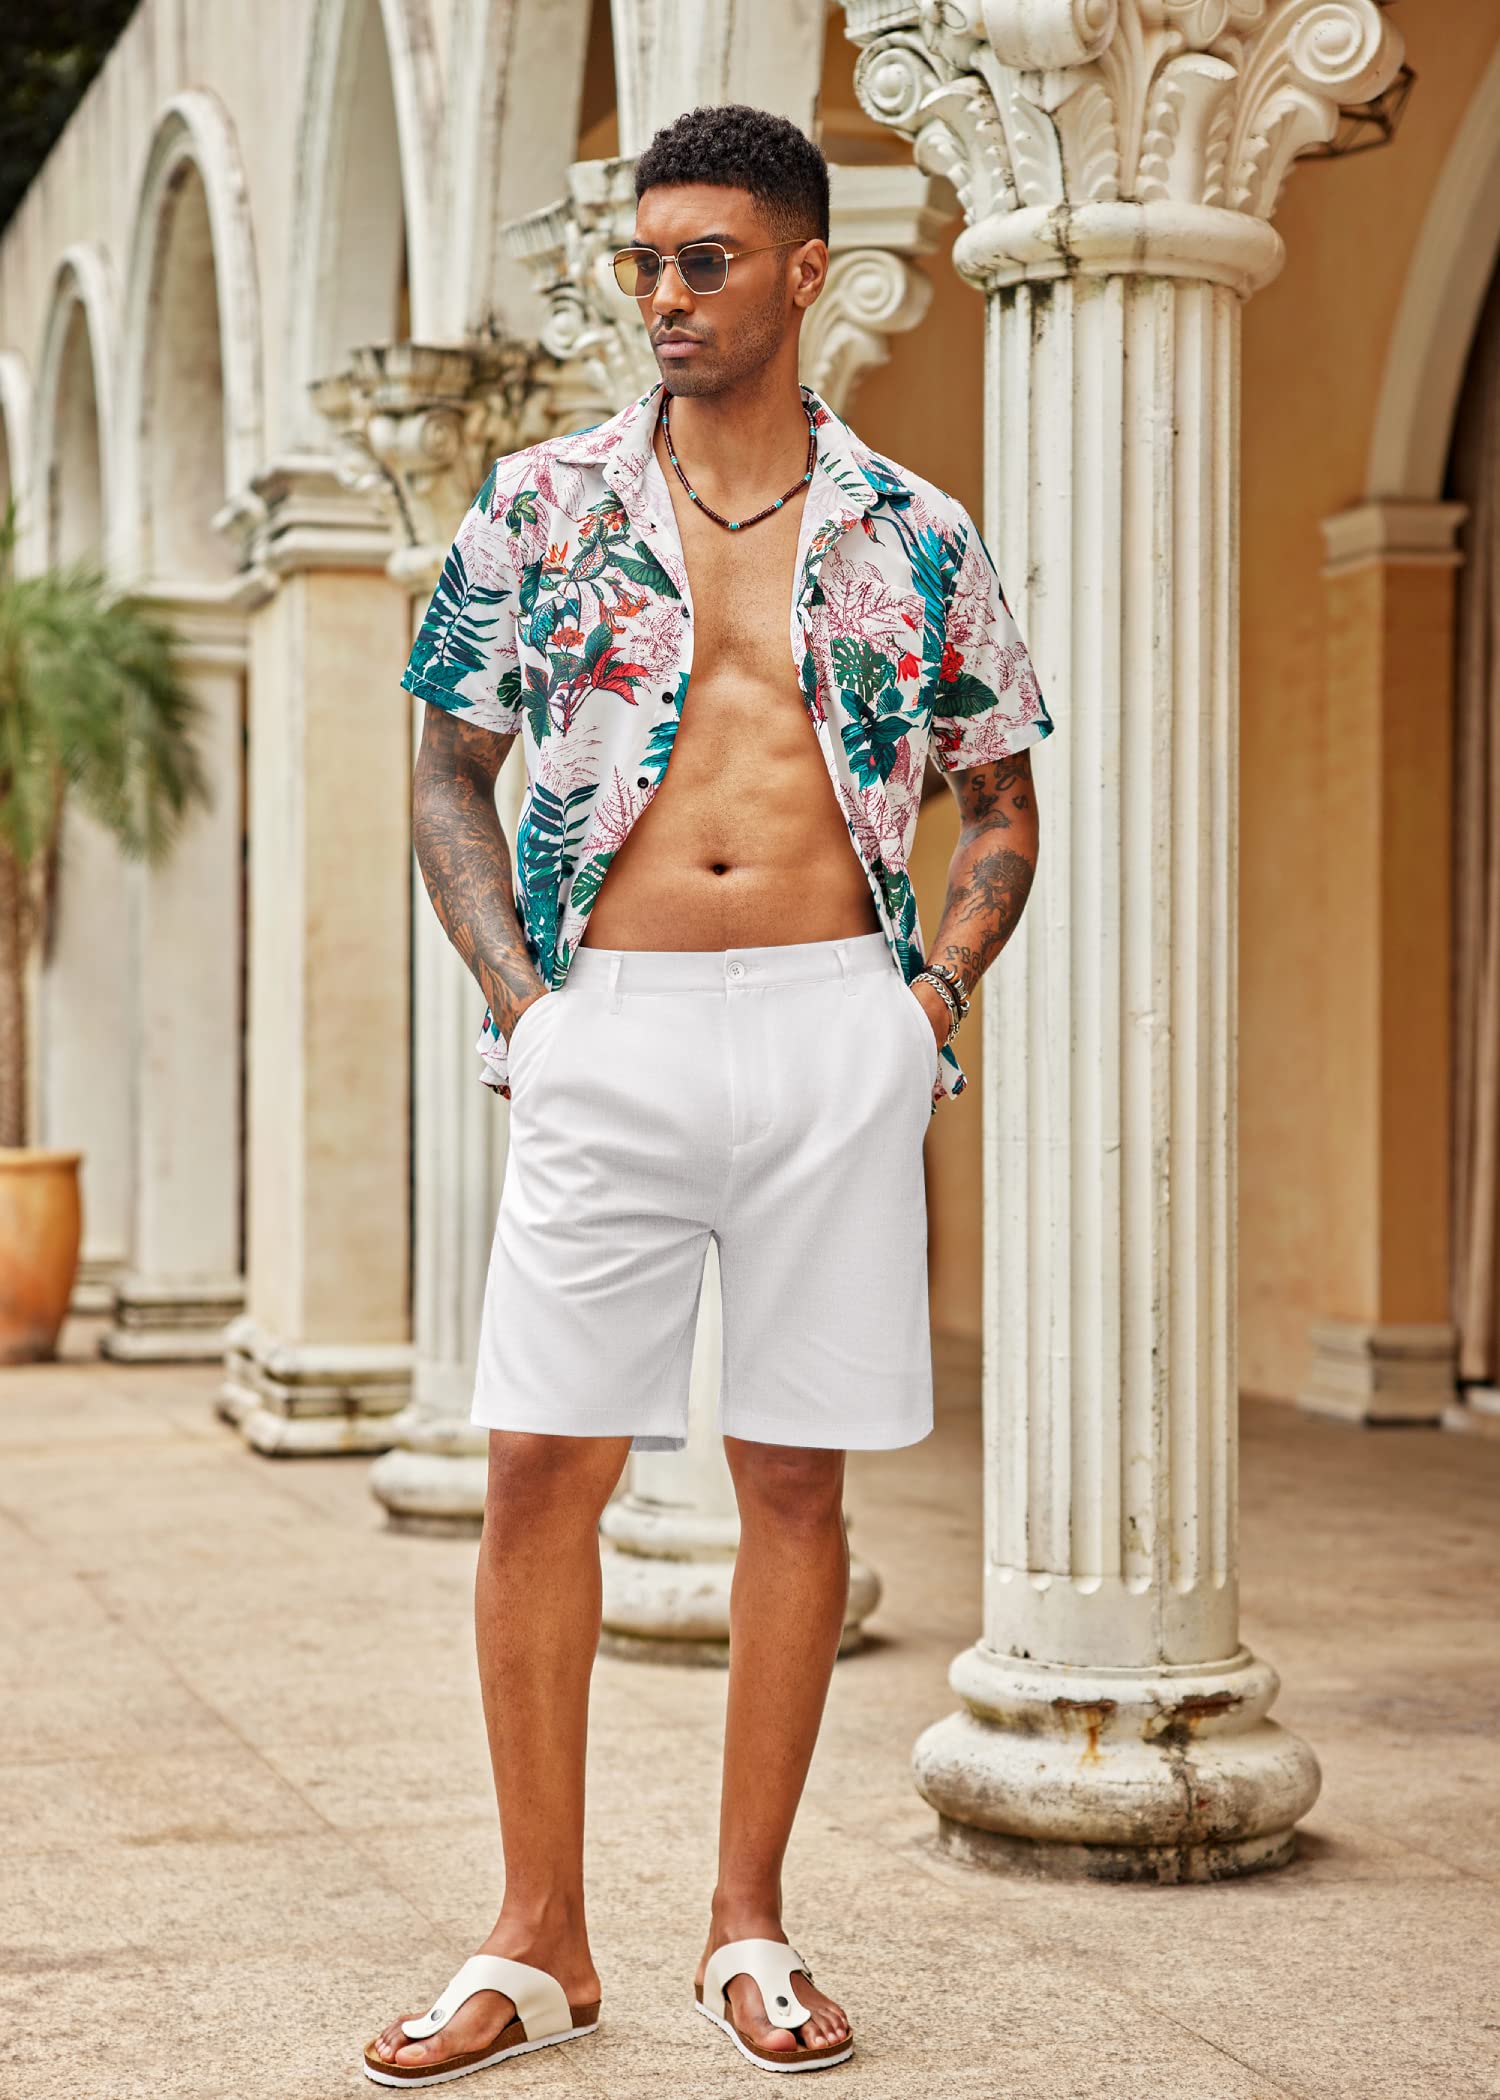 Men's casual shorts are a versatile and practical item of clothing that can be worn in a range of settings, from the beach to the city.